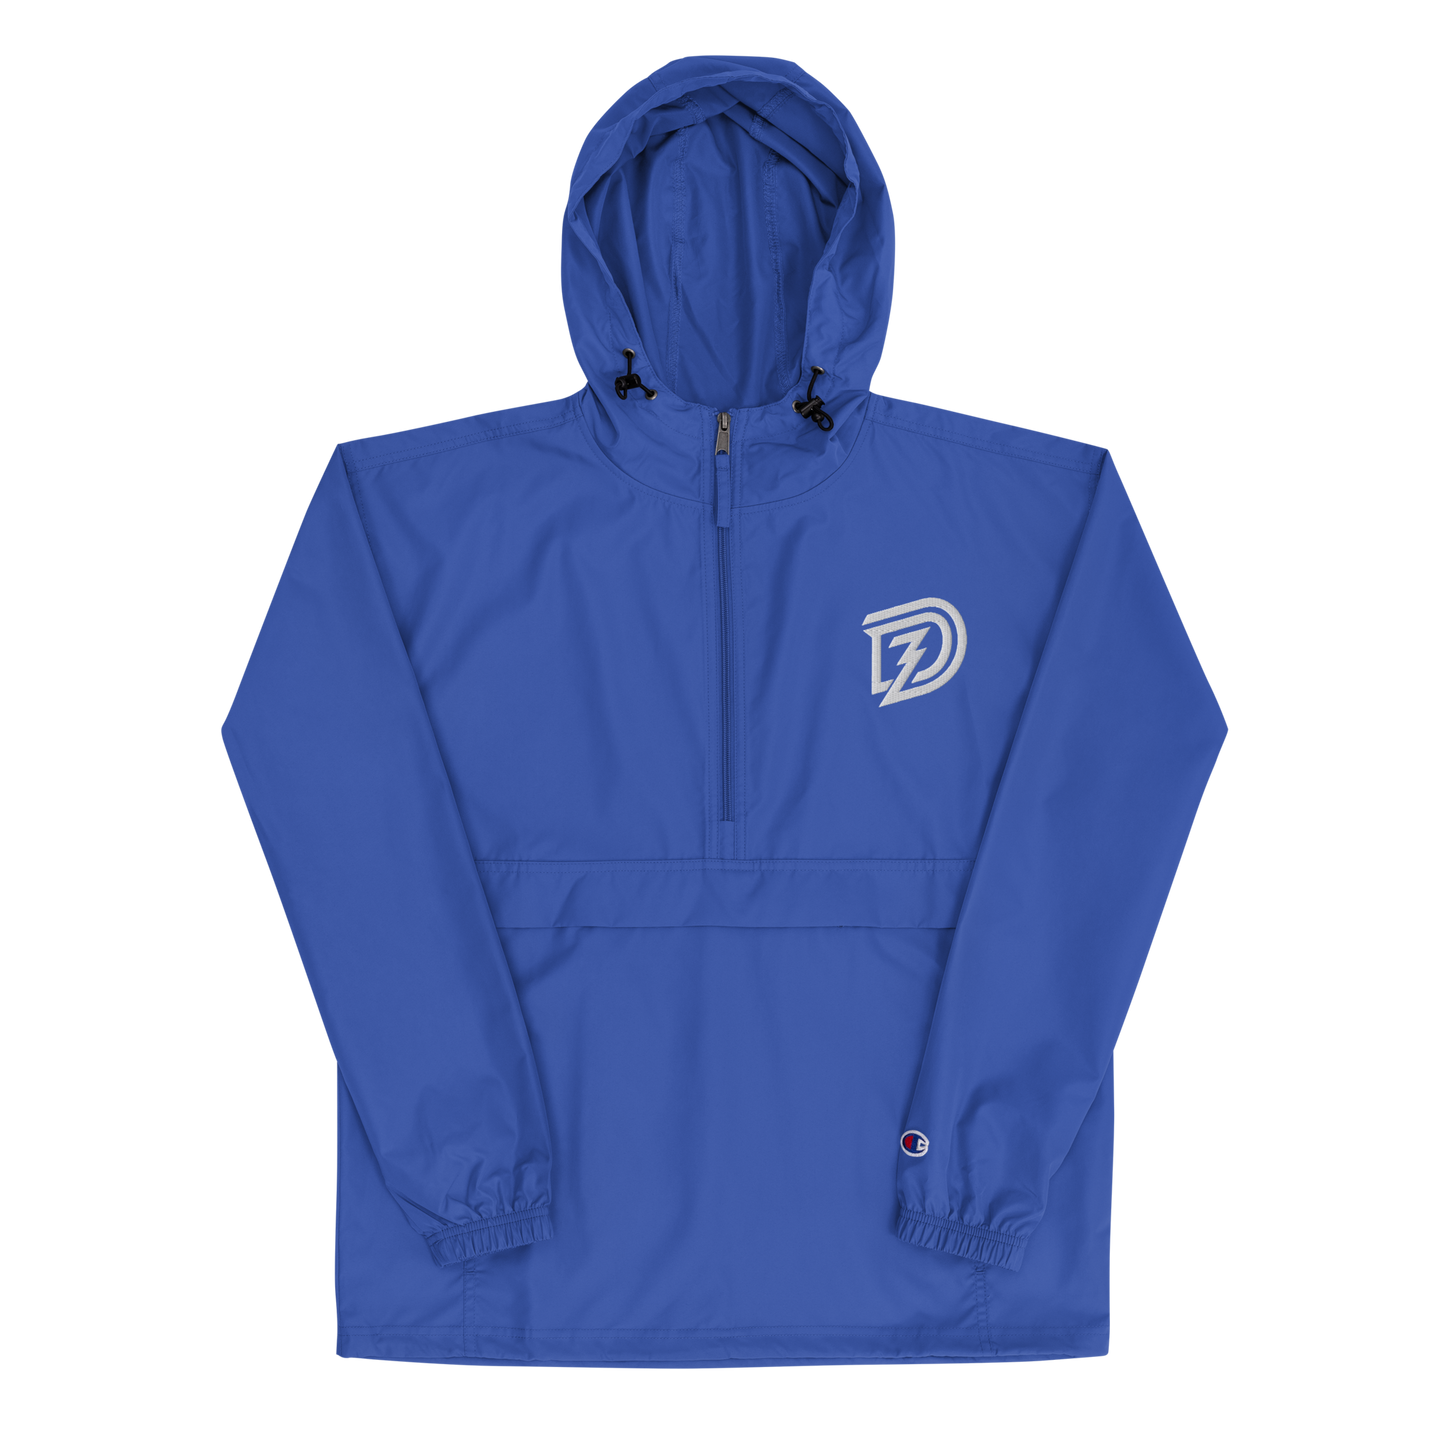 Embroidered Champion Packable Jacket in Royal Blue with hood up